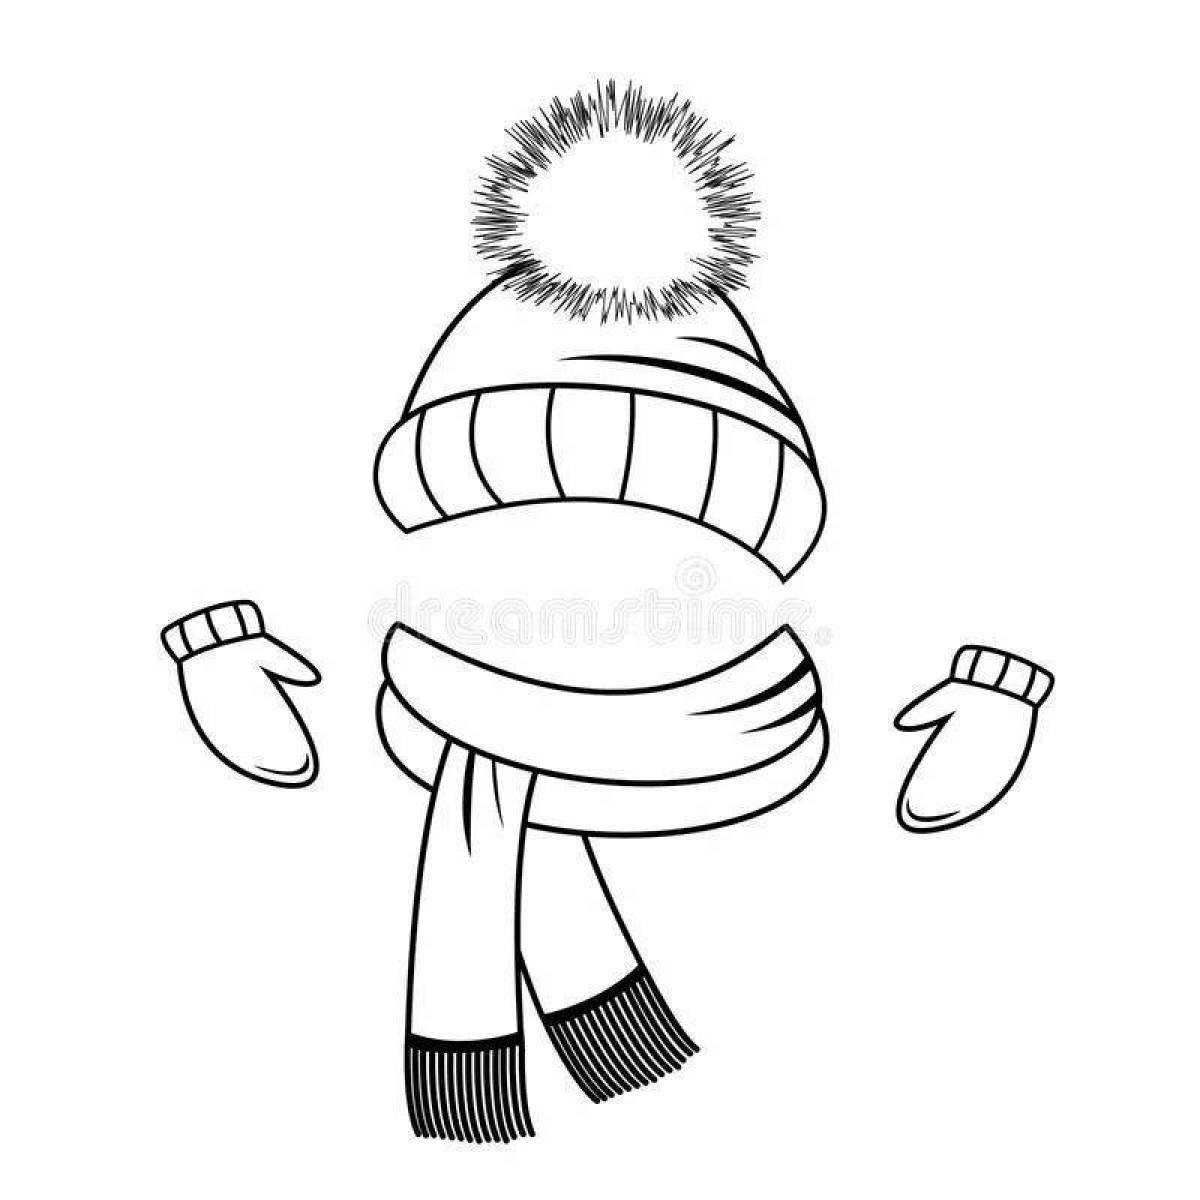 Fun coloring hat and scarf